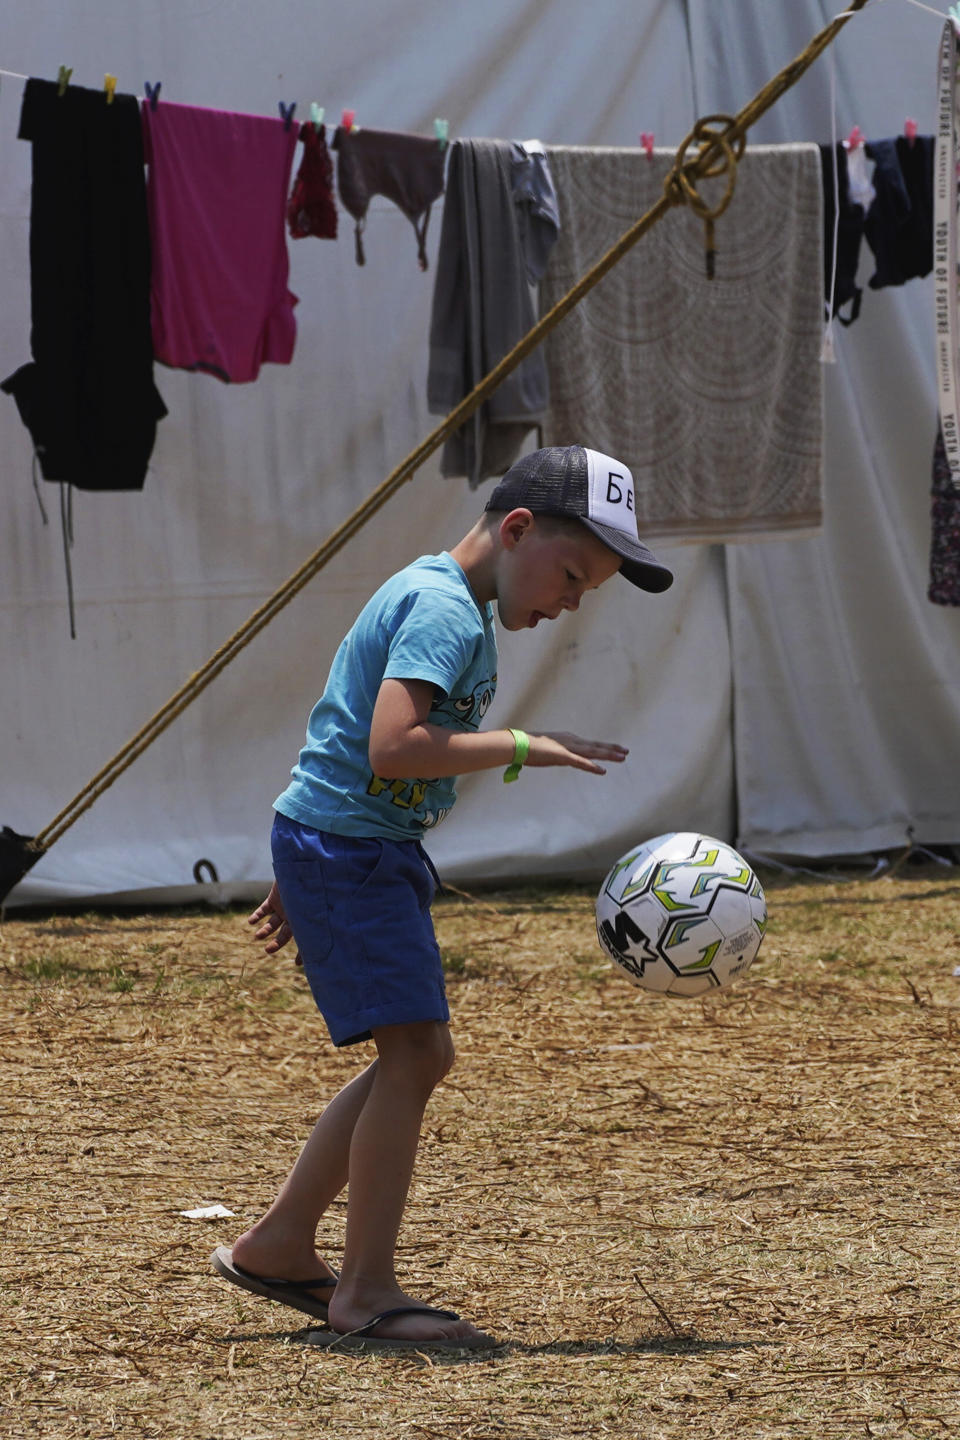 A Ukrainian refugee boy plays with a ball at a camp in Utopia Park, Iztapalapa, Mexico City, Monday, May 2, 2022. (AP Photo/Marco Ugarte)